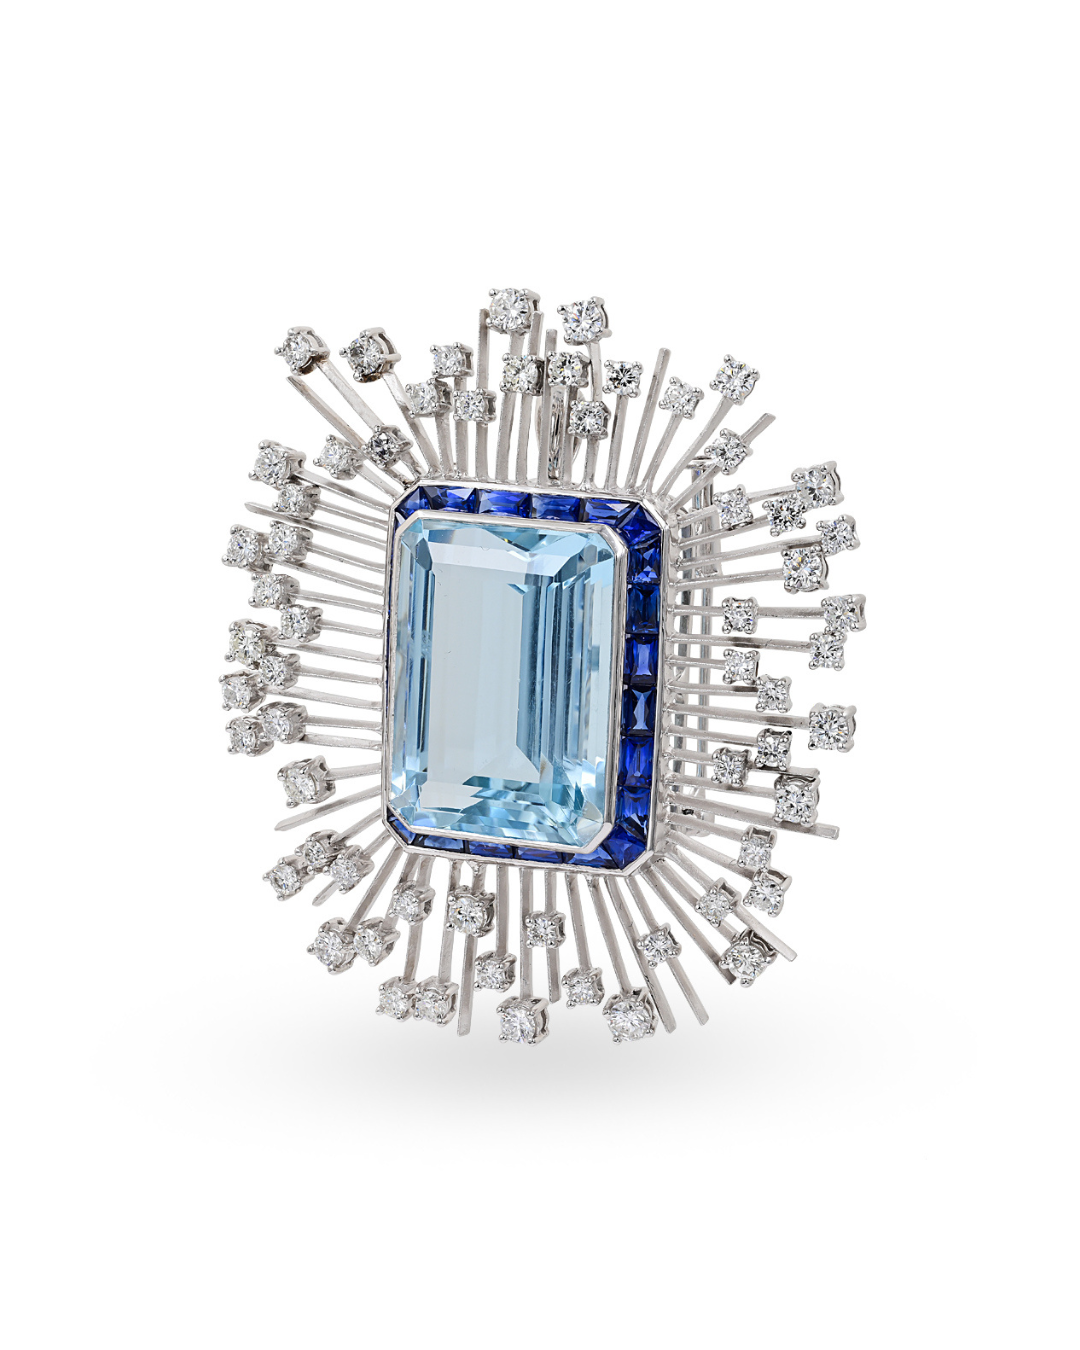 Sophia D. 35 Carat Emerald Cut Aquamarine with French Cut Blue Sapphires and Platinum Stems with Diamonds